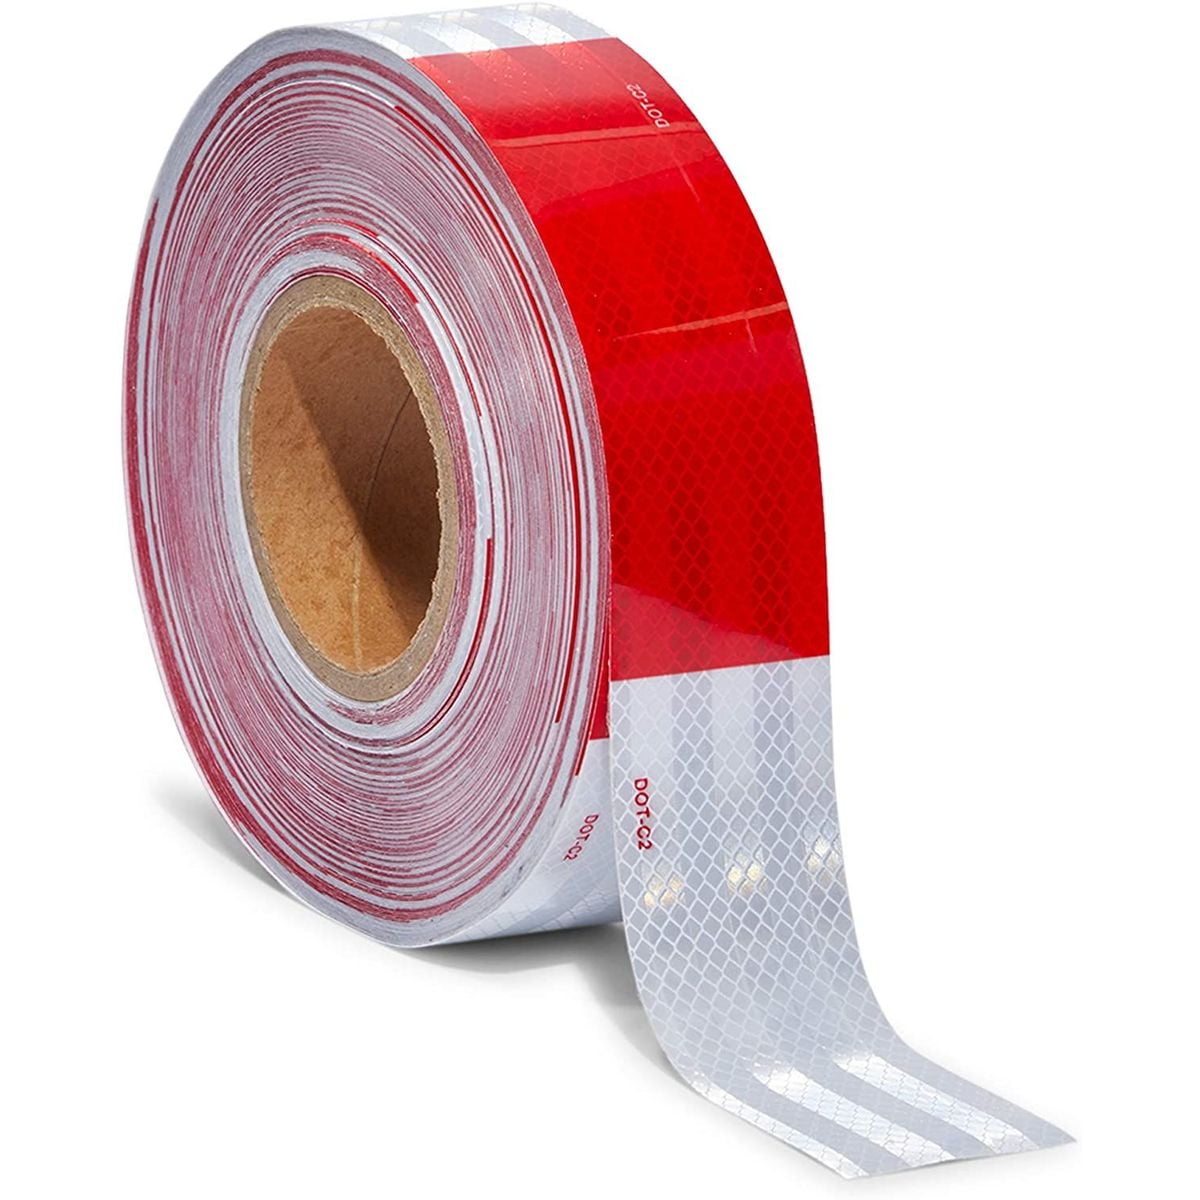 Houseables Reflective Tape Roll DOT-C2 150' X 2" Red/White Trailer Reflec... 